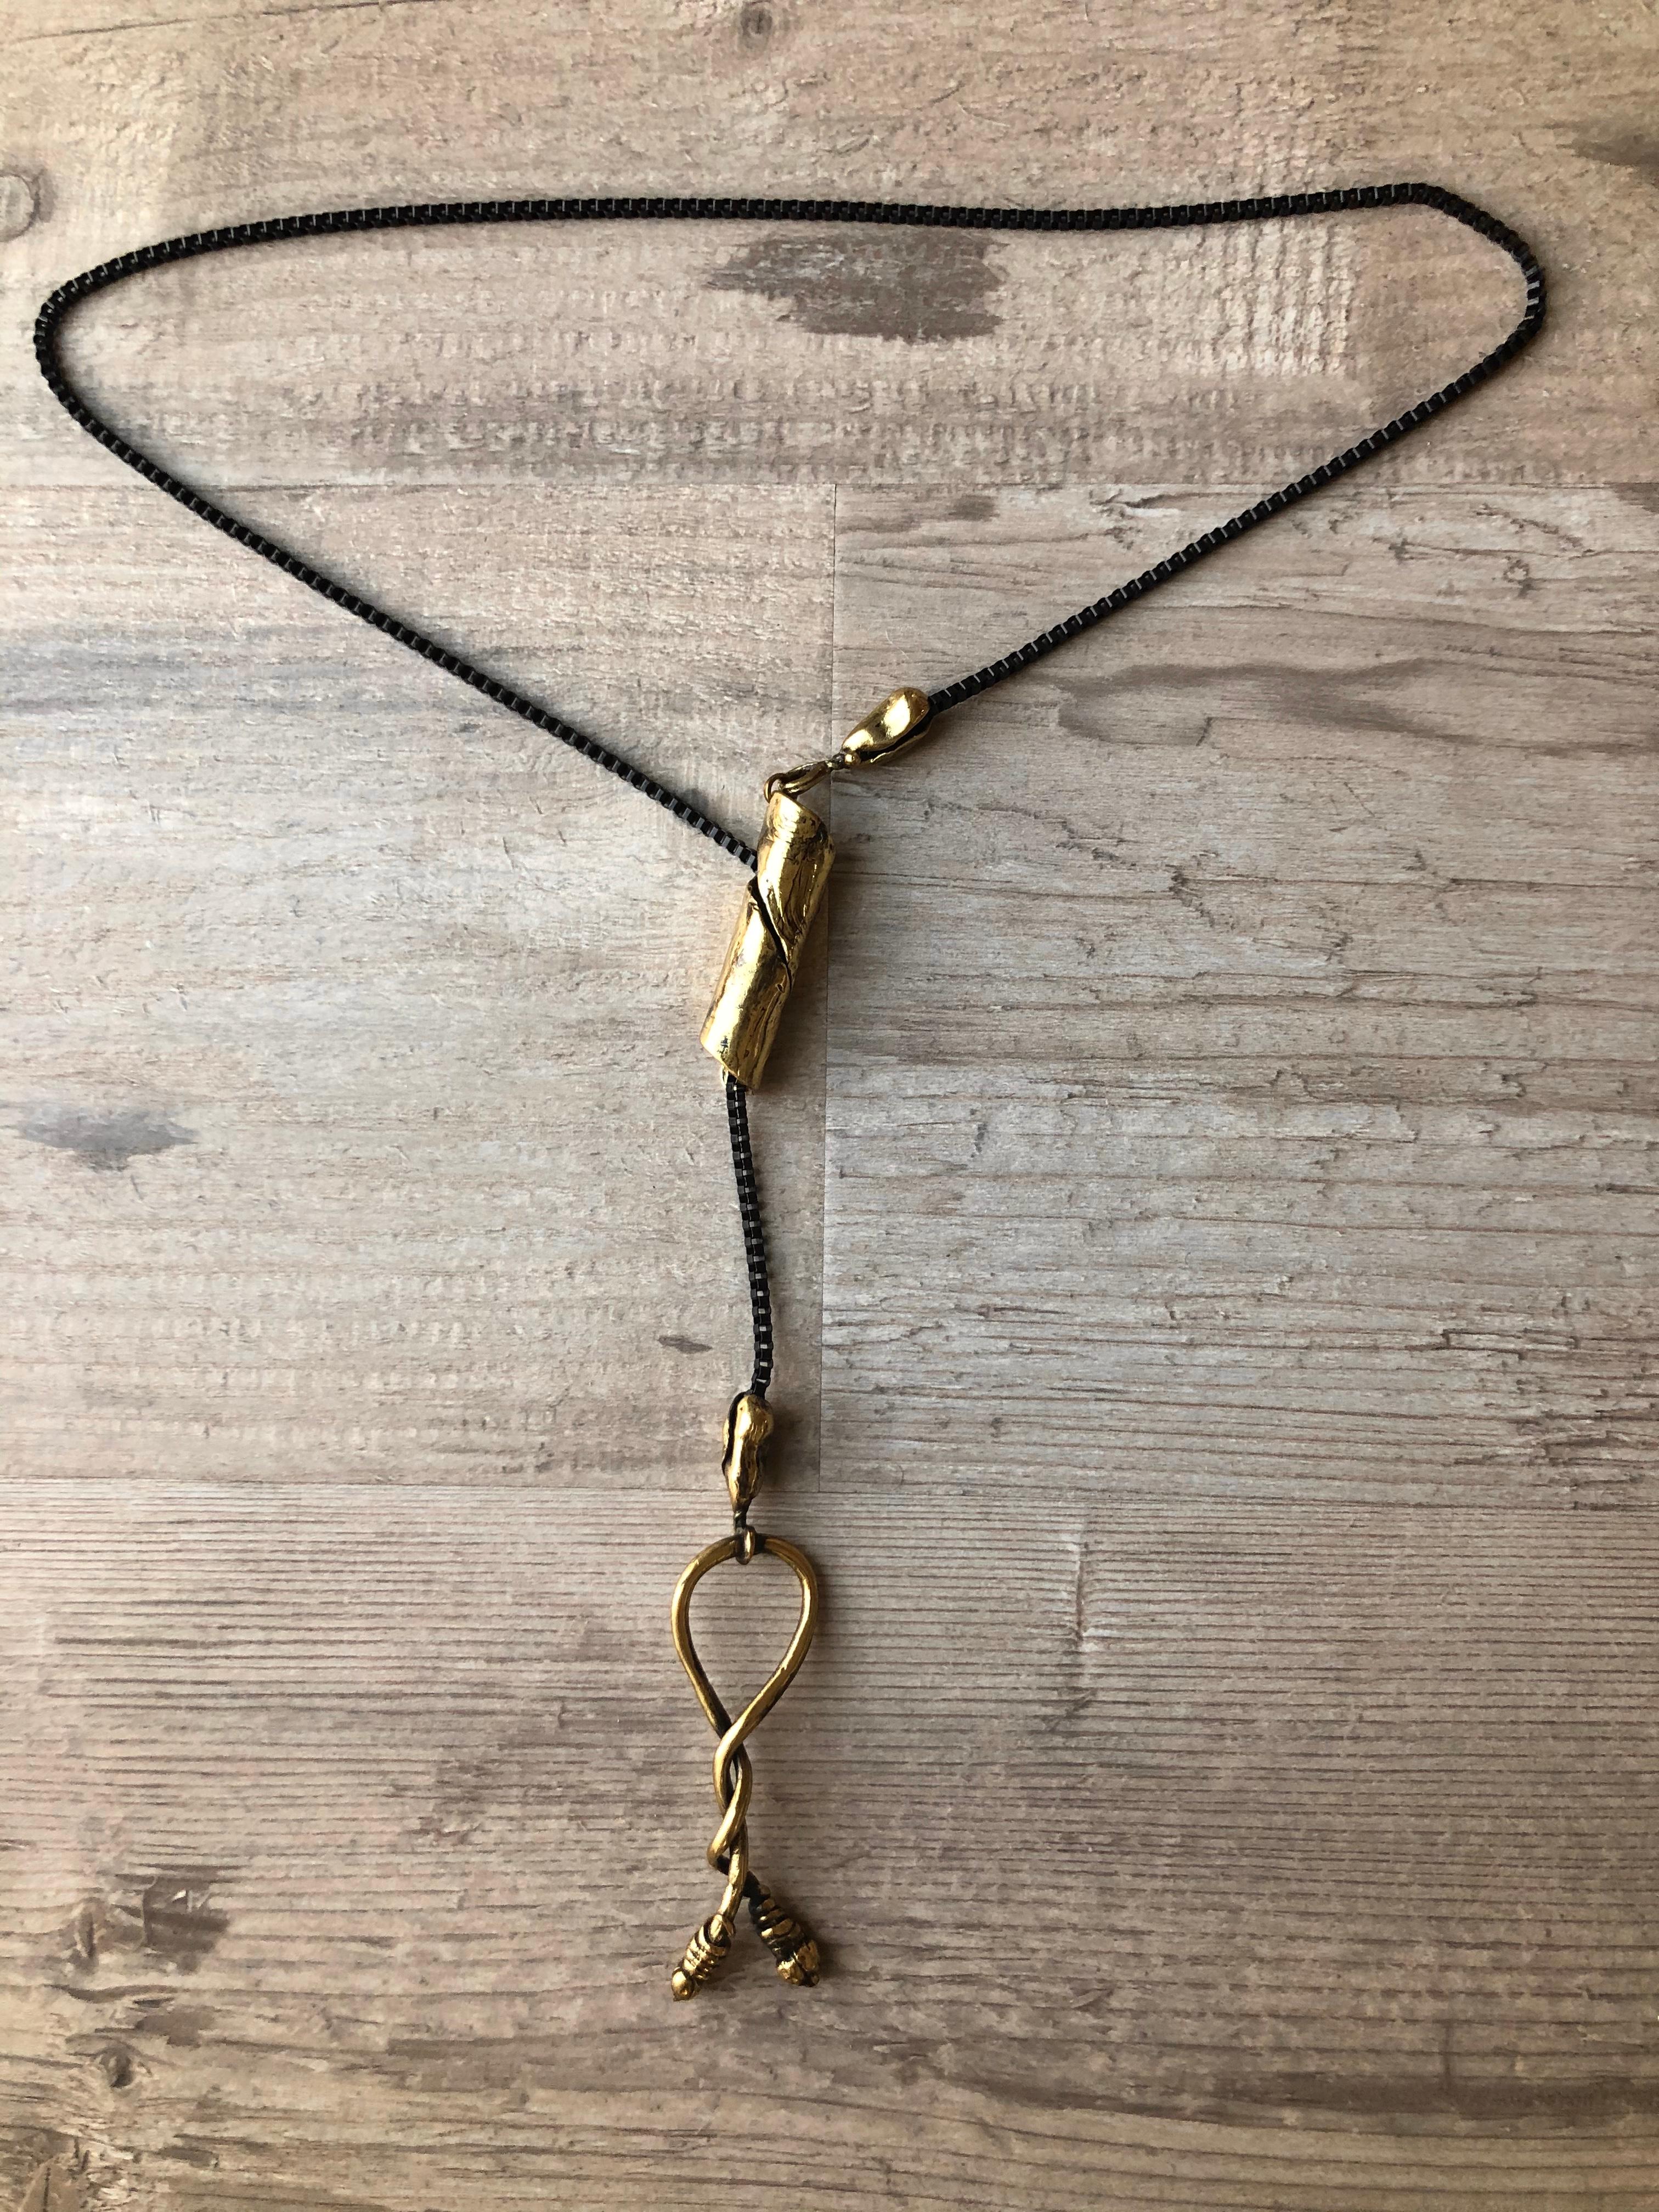 Inspired by the Knot which has the recurring theme of love and commitment. The intricate details of ancient Greek jewelry making, this dramatically long bronze pendant reveals the hand of the artist with its hand-forged texture and dainty and soft